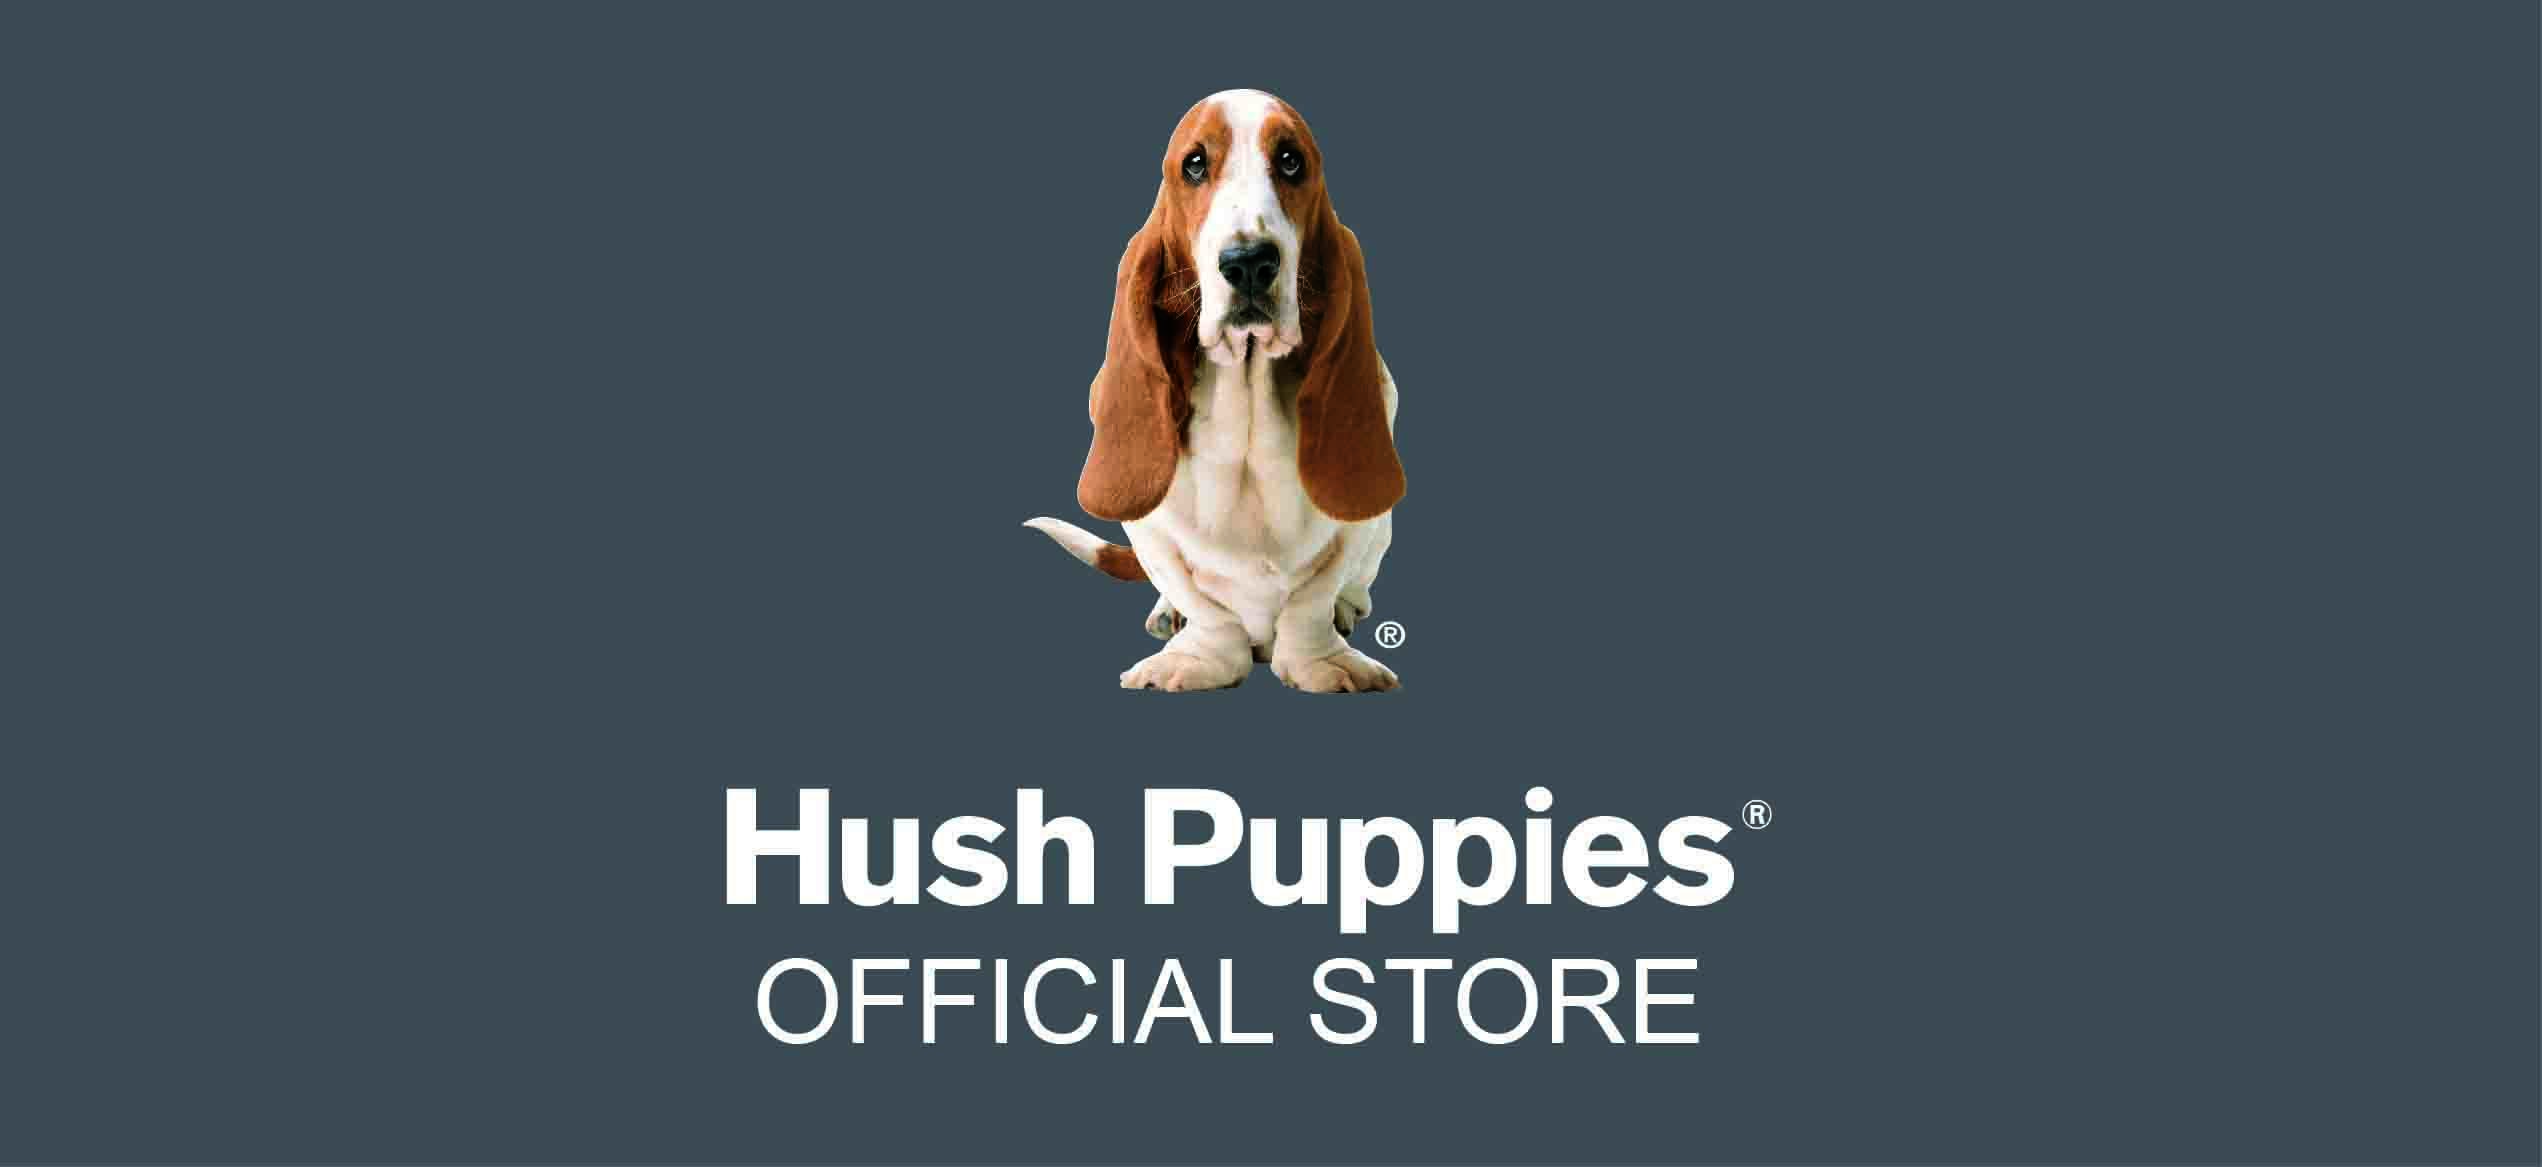 Hush Puppies Official Store